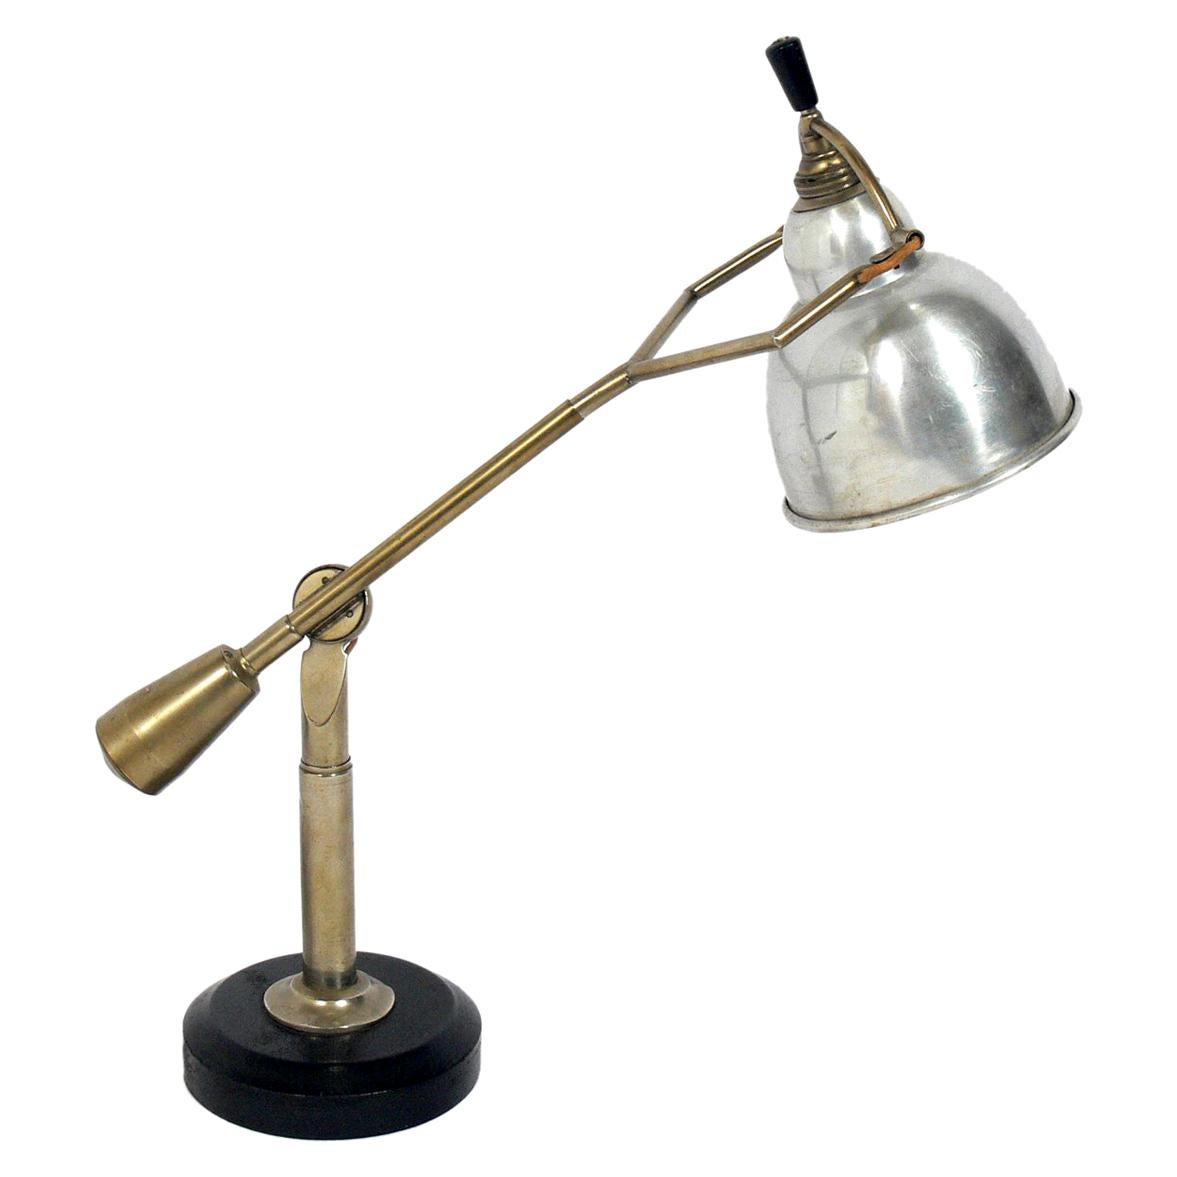 Original Cantilevered Art Deco Lamp by Edouard-Wilfred Buquet